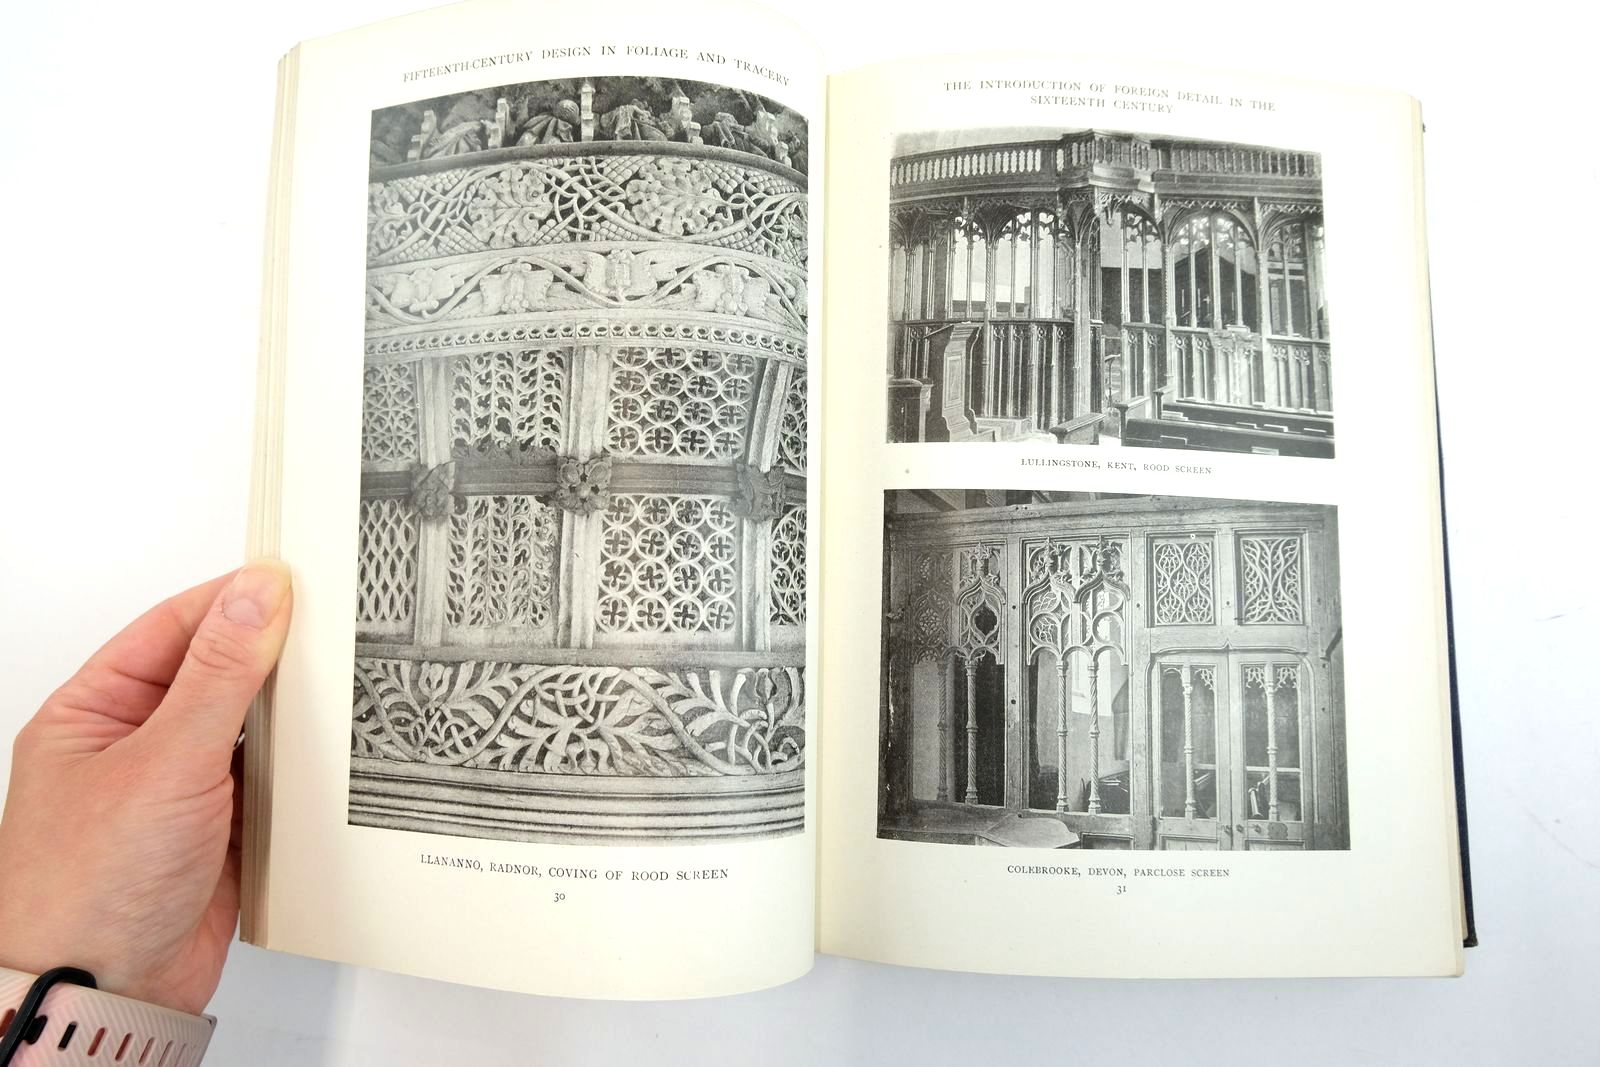 Photo of ENGLISH CHURCH WOODWORK: A STUDY IN CRAFTSMANSHIP DURING THE MEDIAEVAL PERIOD A.D. 1250-1550 written by Howard, F.E.
Crossley, F.H. published by B.T. Batsford Ltd. (STOCK CODE: 2134792)  for sale by Stella & Rose's Books